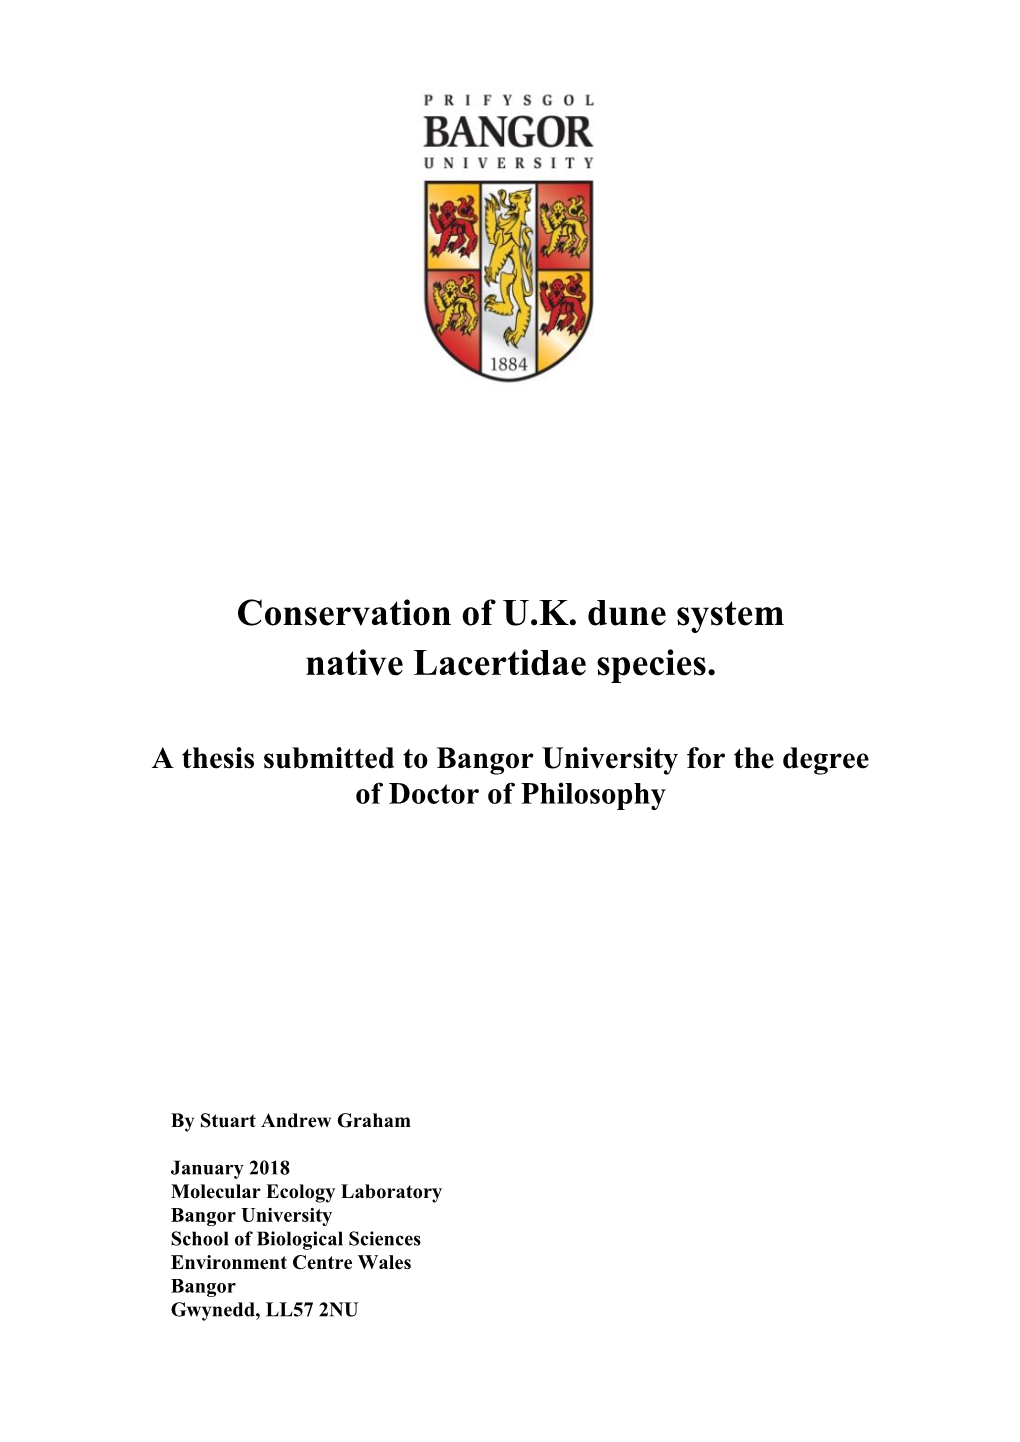 Conservation of UK Dune System Native Lacertidae Species